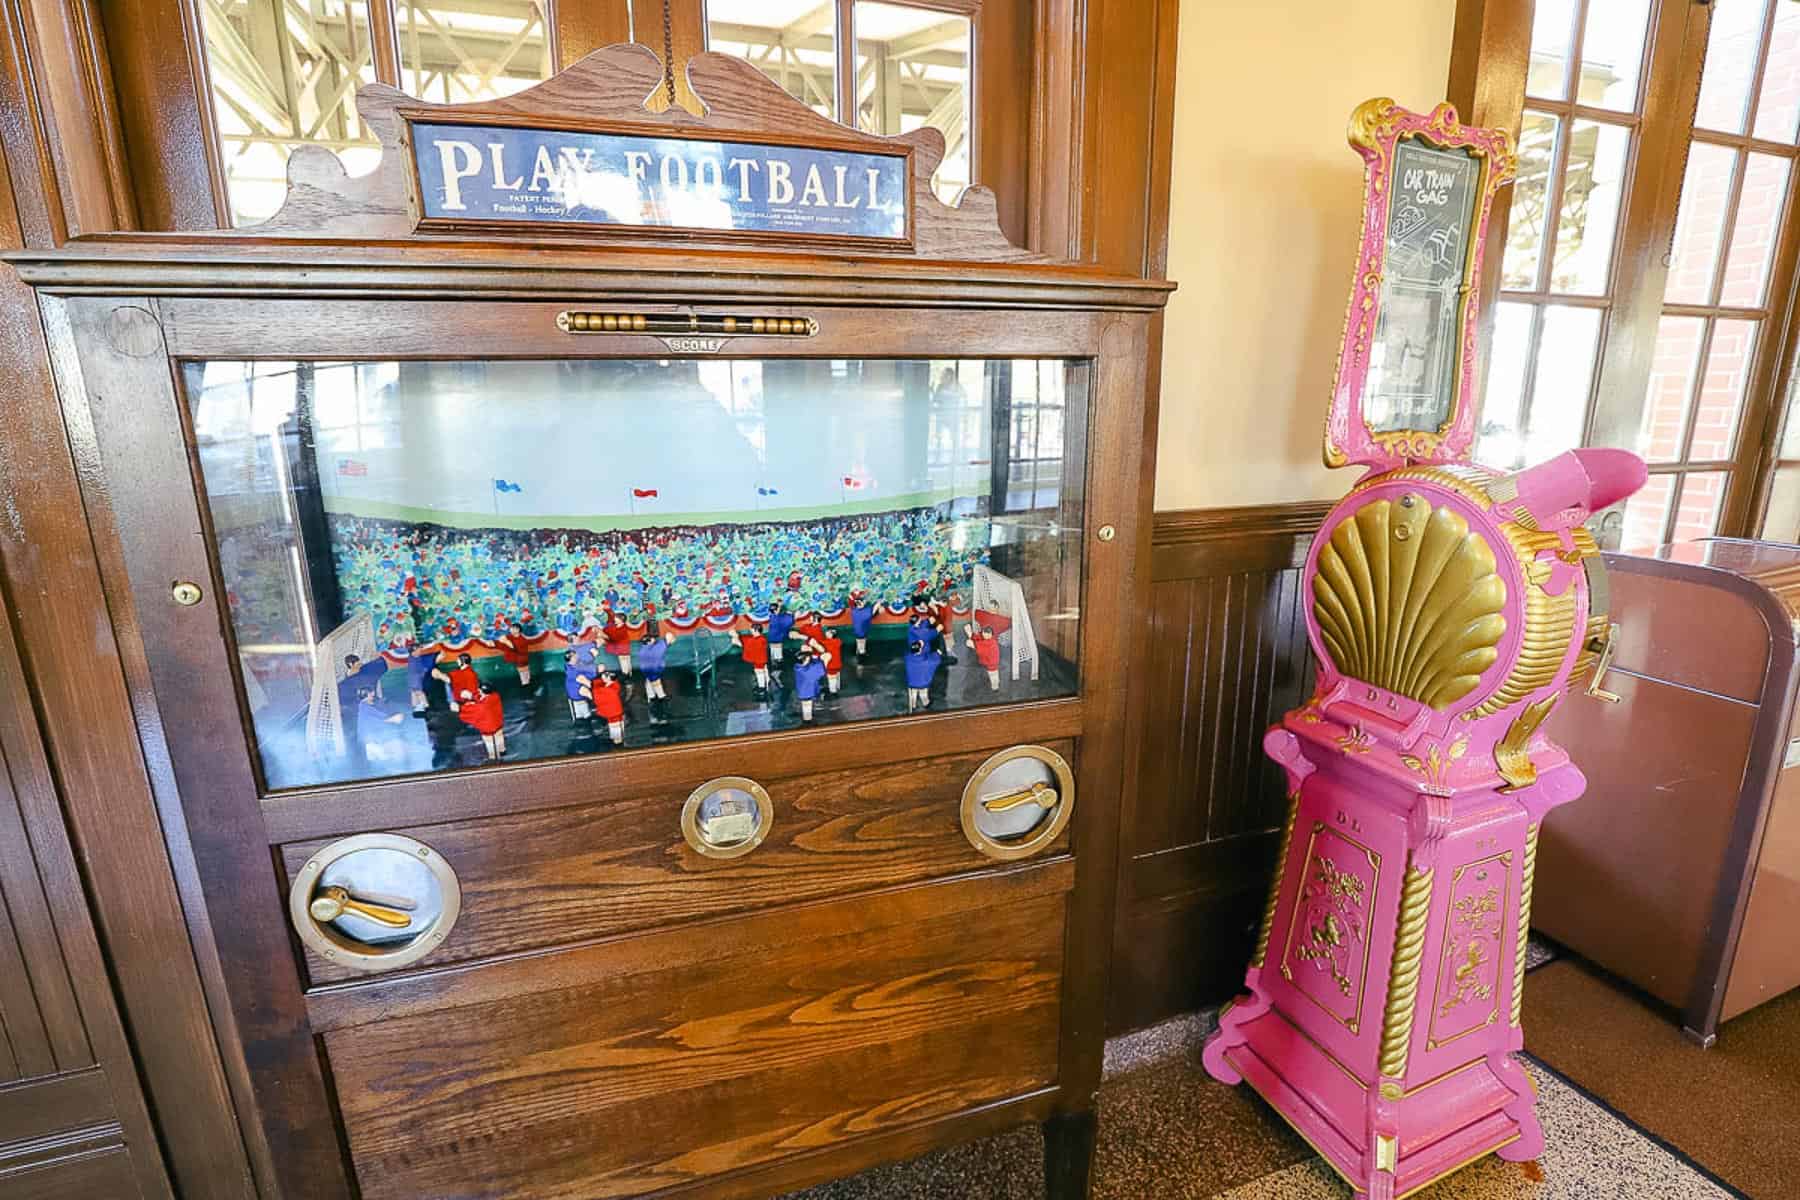 antique games in the waiting area of the Walt Disney World Railroad 